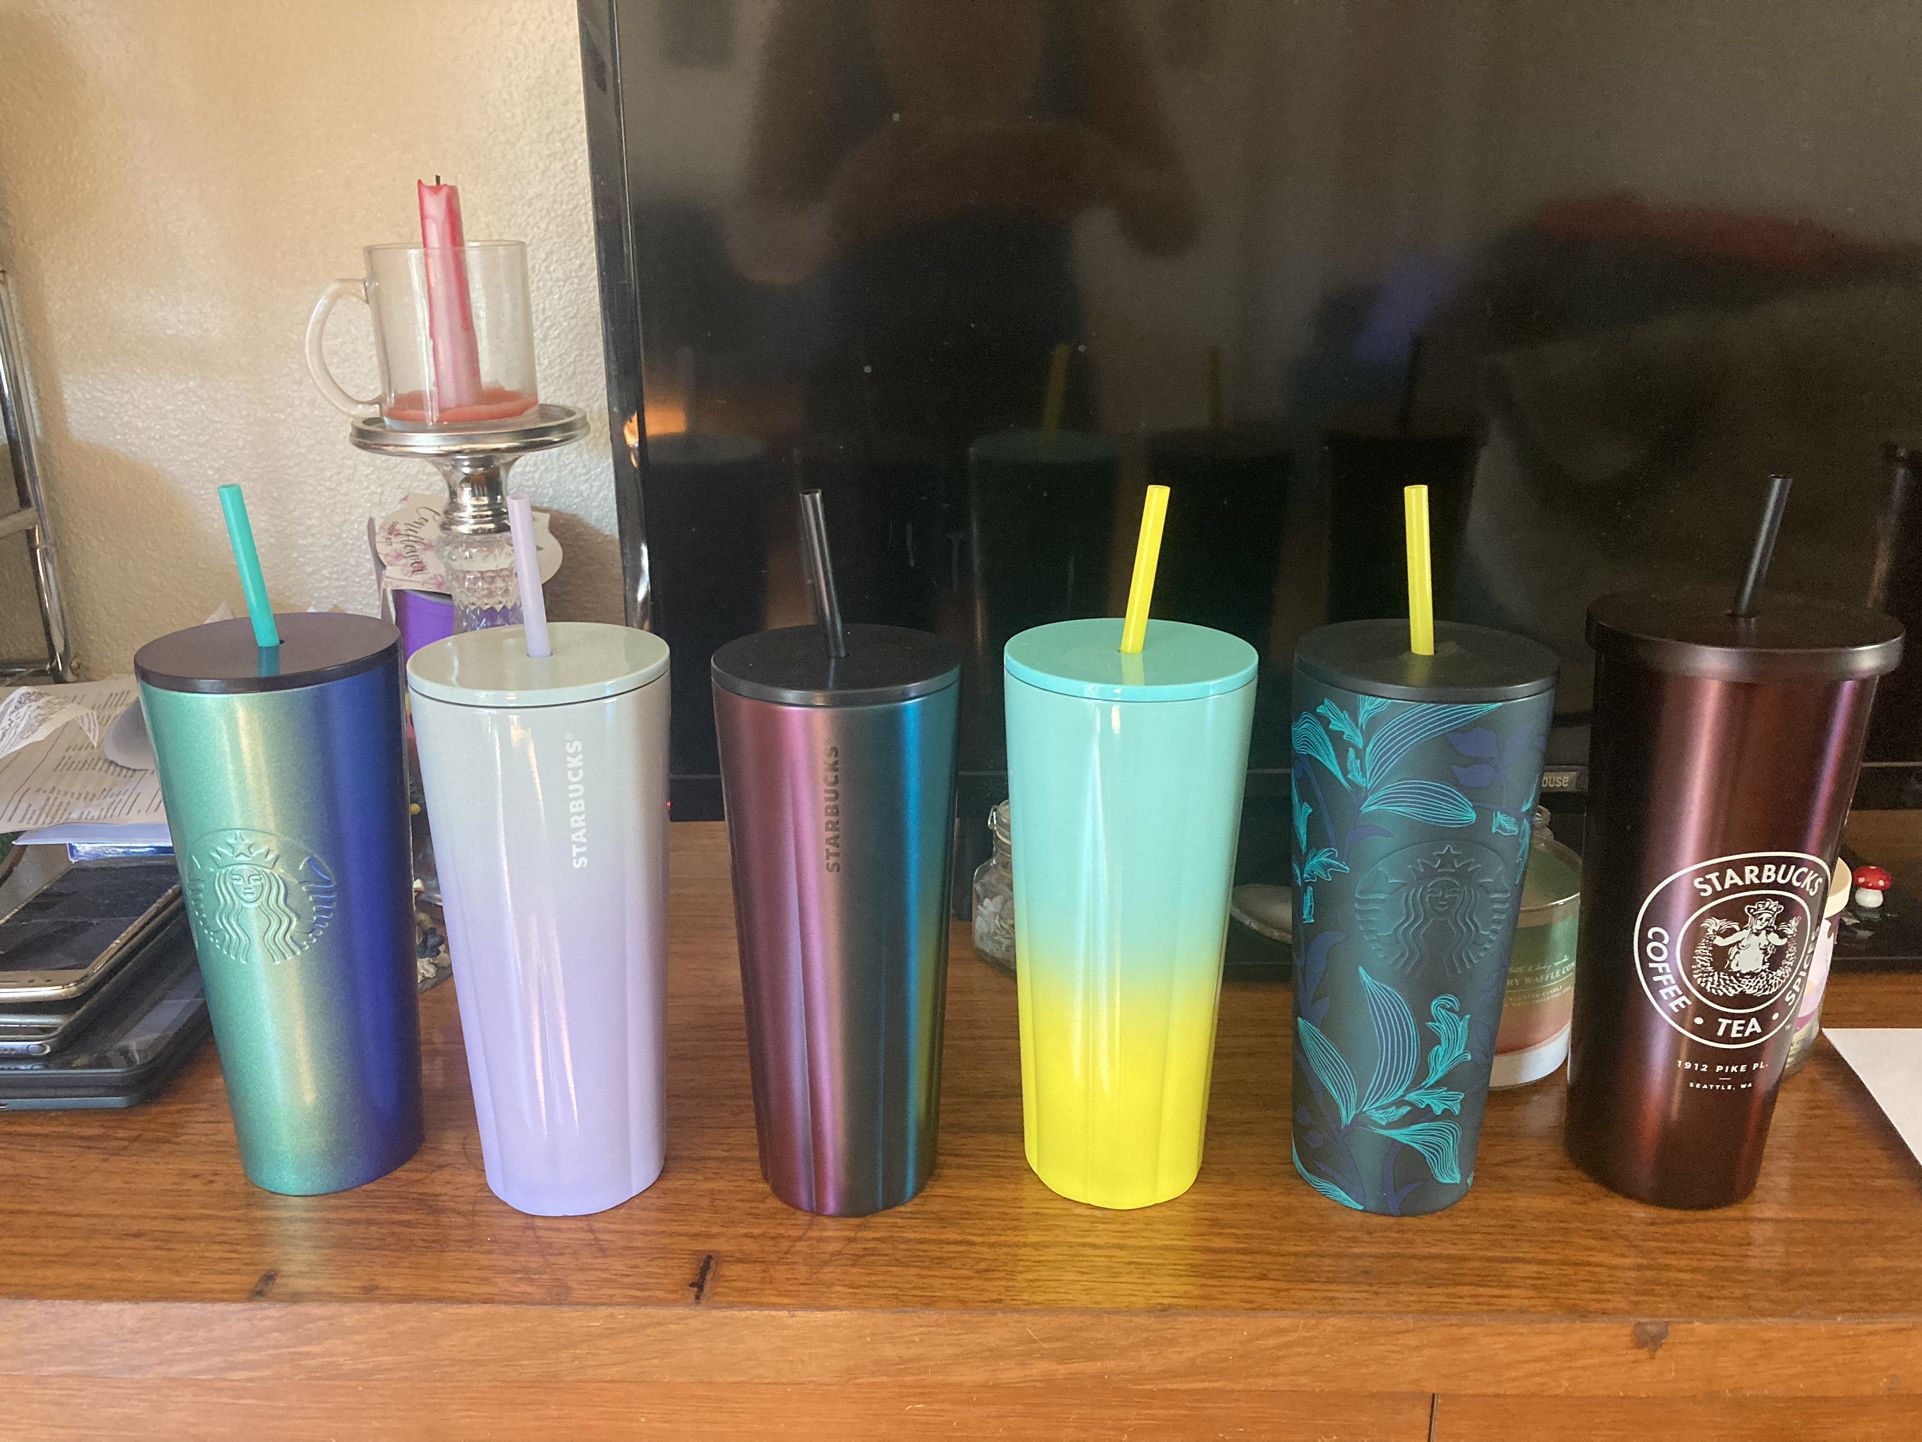 Thermos Brand 68 Oz for Sale in Bonney Lake, WA - OfferUp